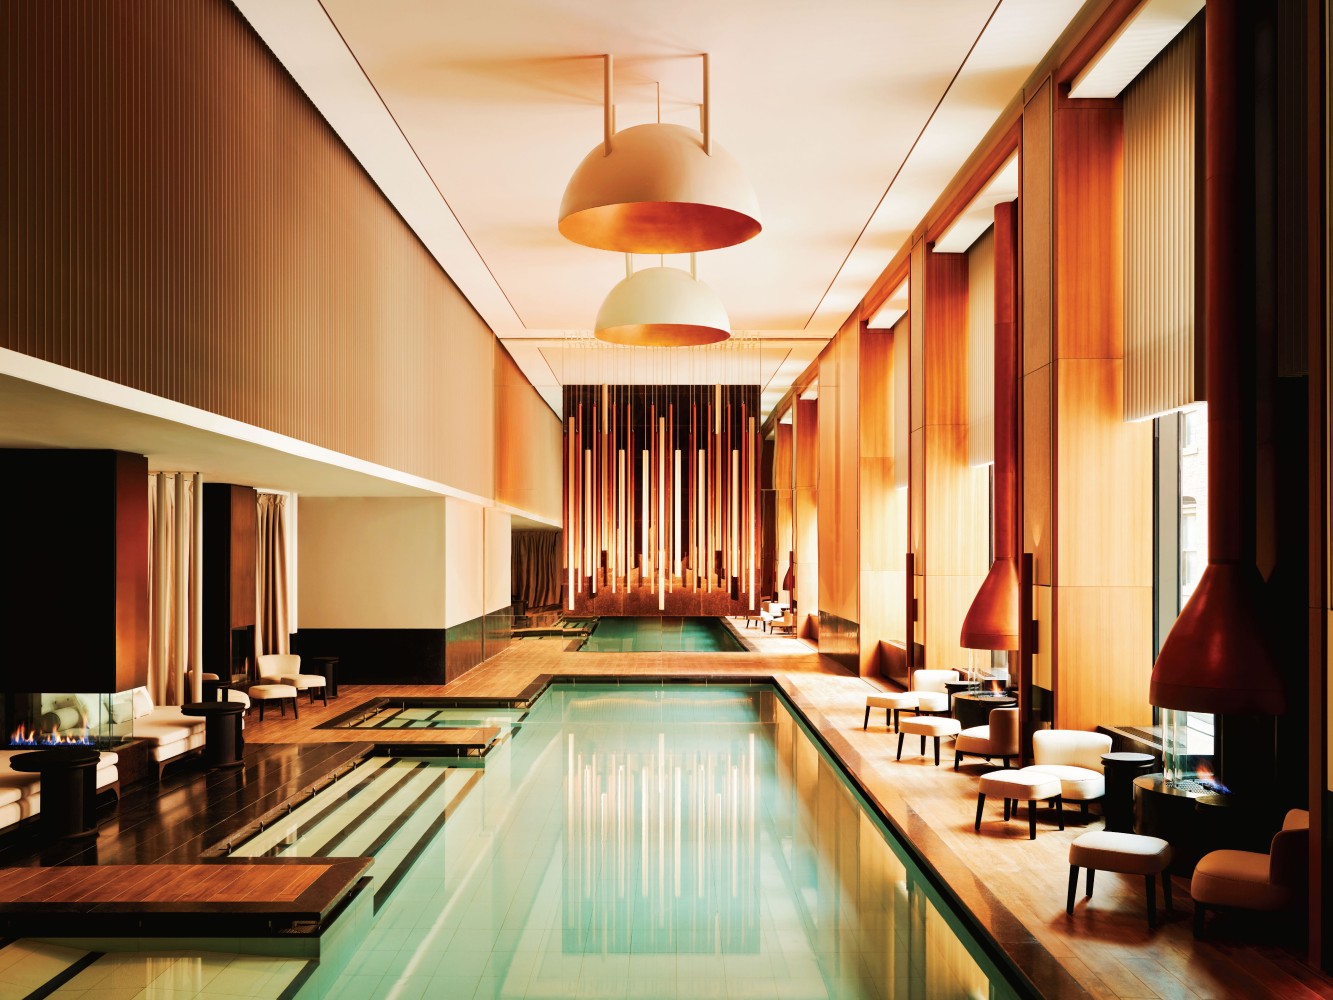 The Aman Hotel Spa, a symbol of the ongoing developments occurring in the city.